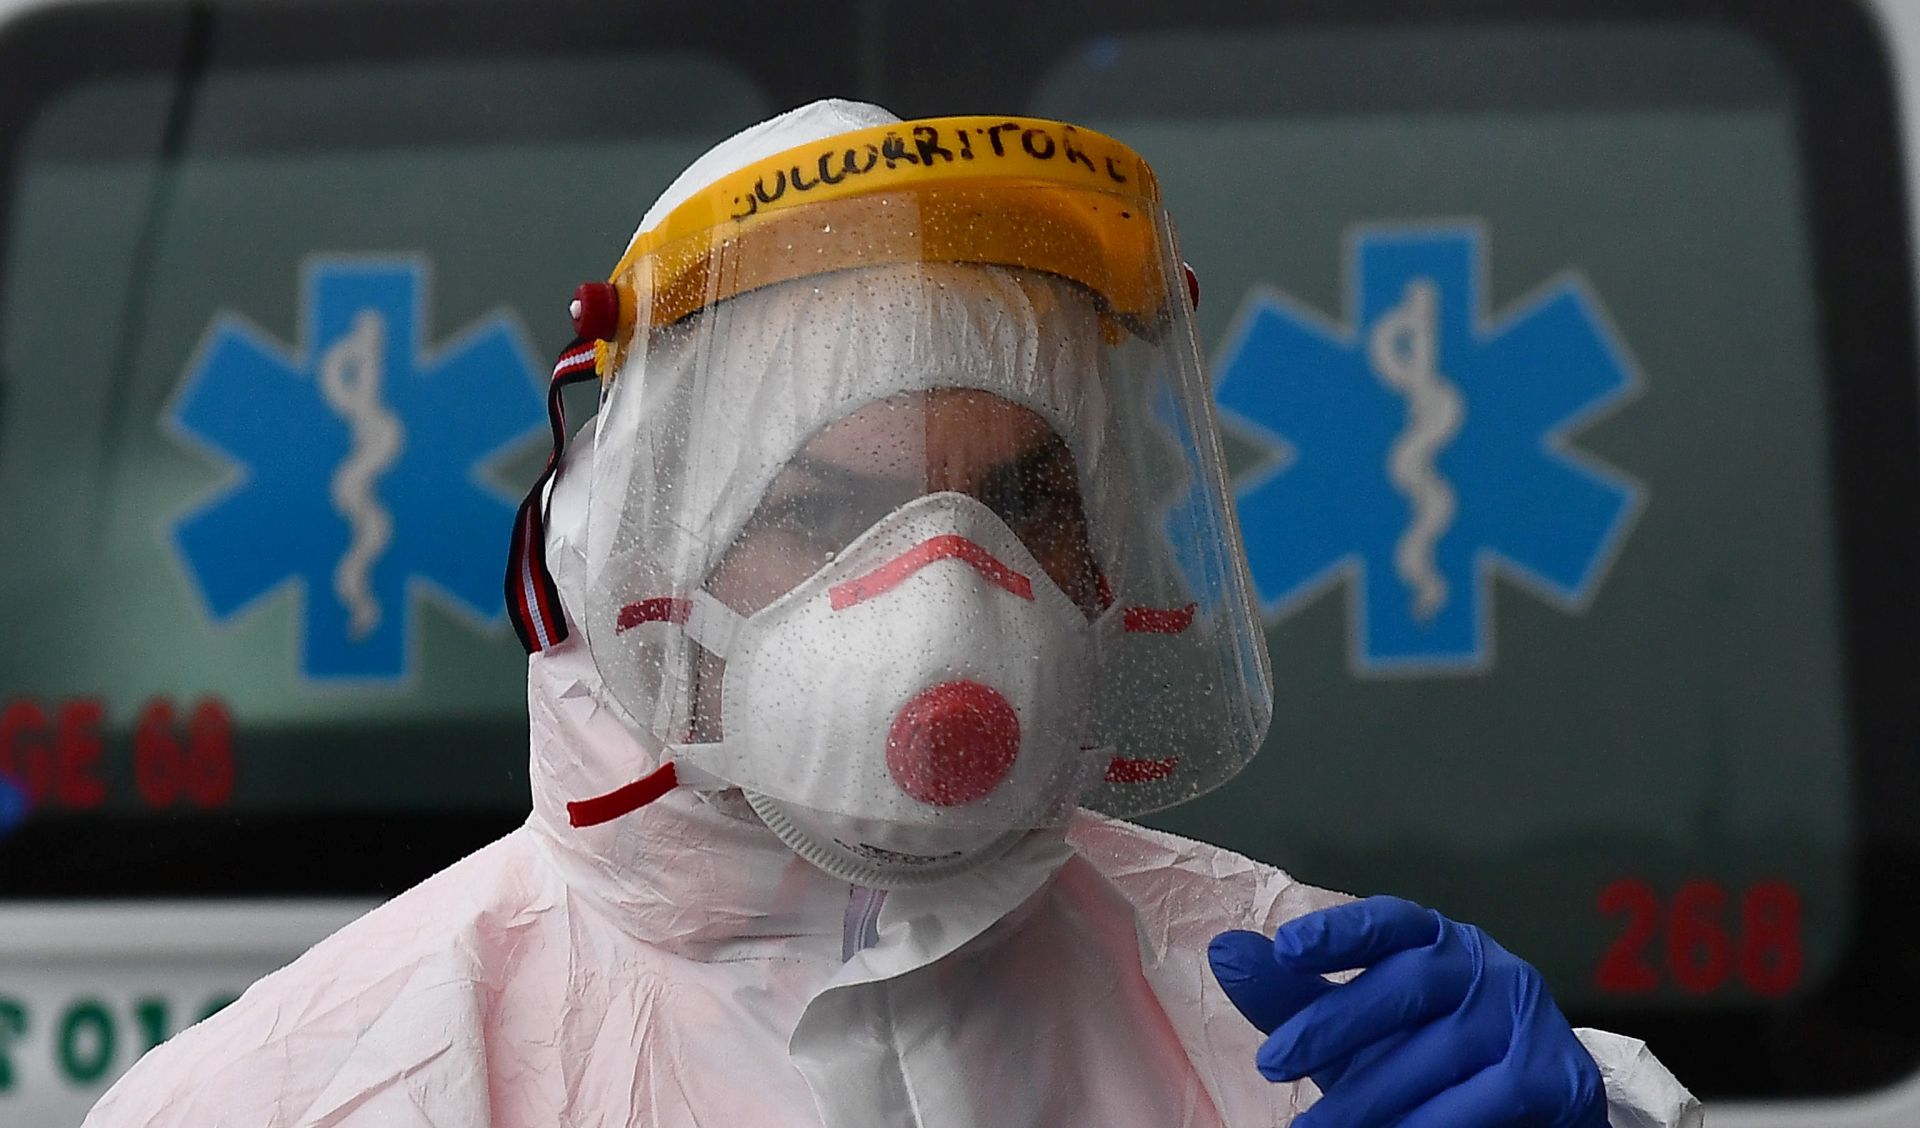 epa08292846 Health workers of the Genoa White Cross wearing protective health masks and overalls get dressed to pick up patients suspected of having contracted the Covid-19 coronavirus, Genoa, Italy, 13 March 2020. Tough lockdown measures kicked in throughout Italy on 12 March after Prime Minister Giuseppe Conte announced late on 11 March that all non-essential shops should close as part of the efforts to contain the ongoing pandemic of the COVID-1.  EPA/LUCA ZENNARO